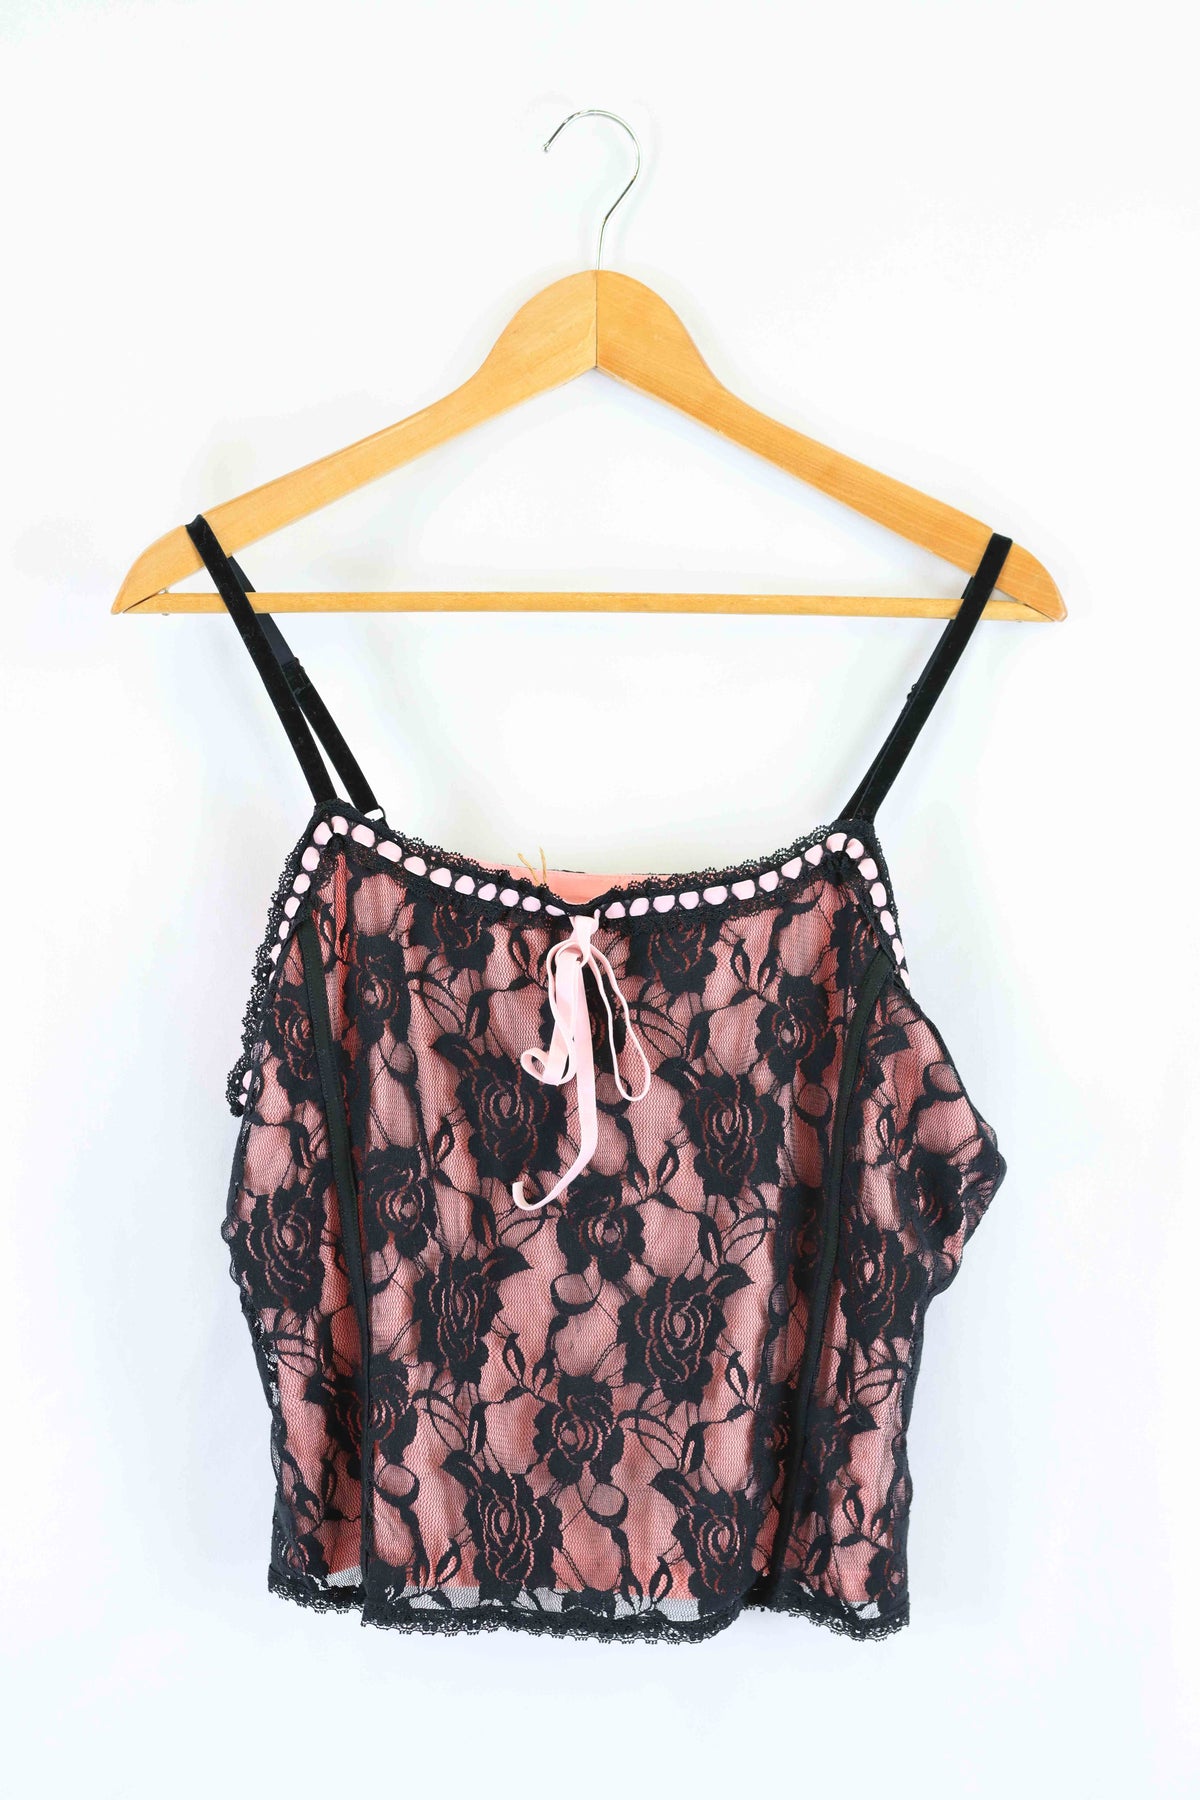 Dangerfield Pink with Black Lace Singlet 16